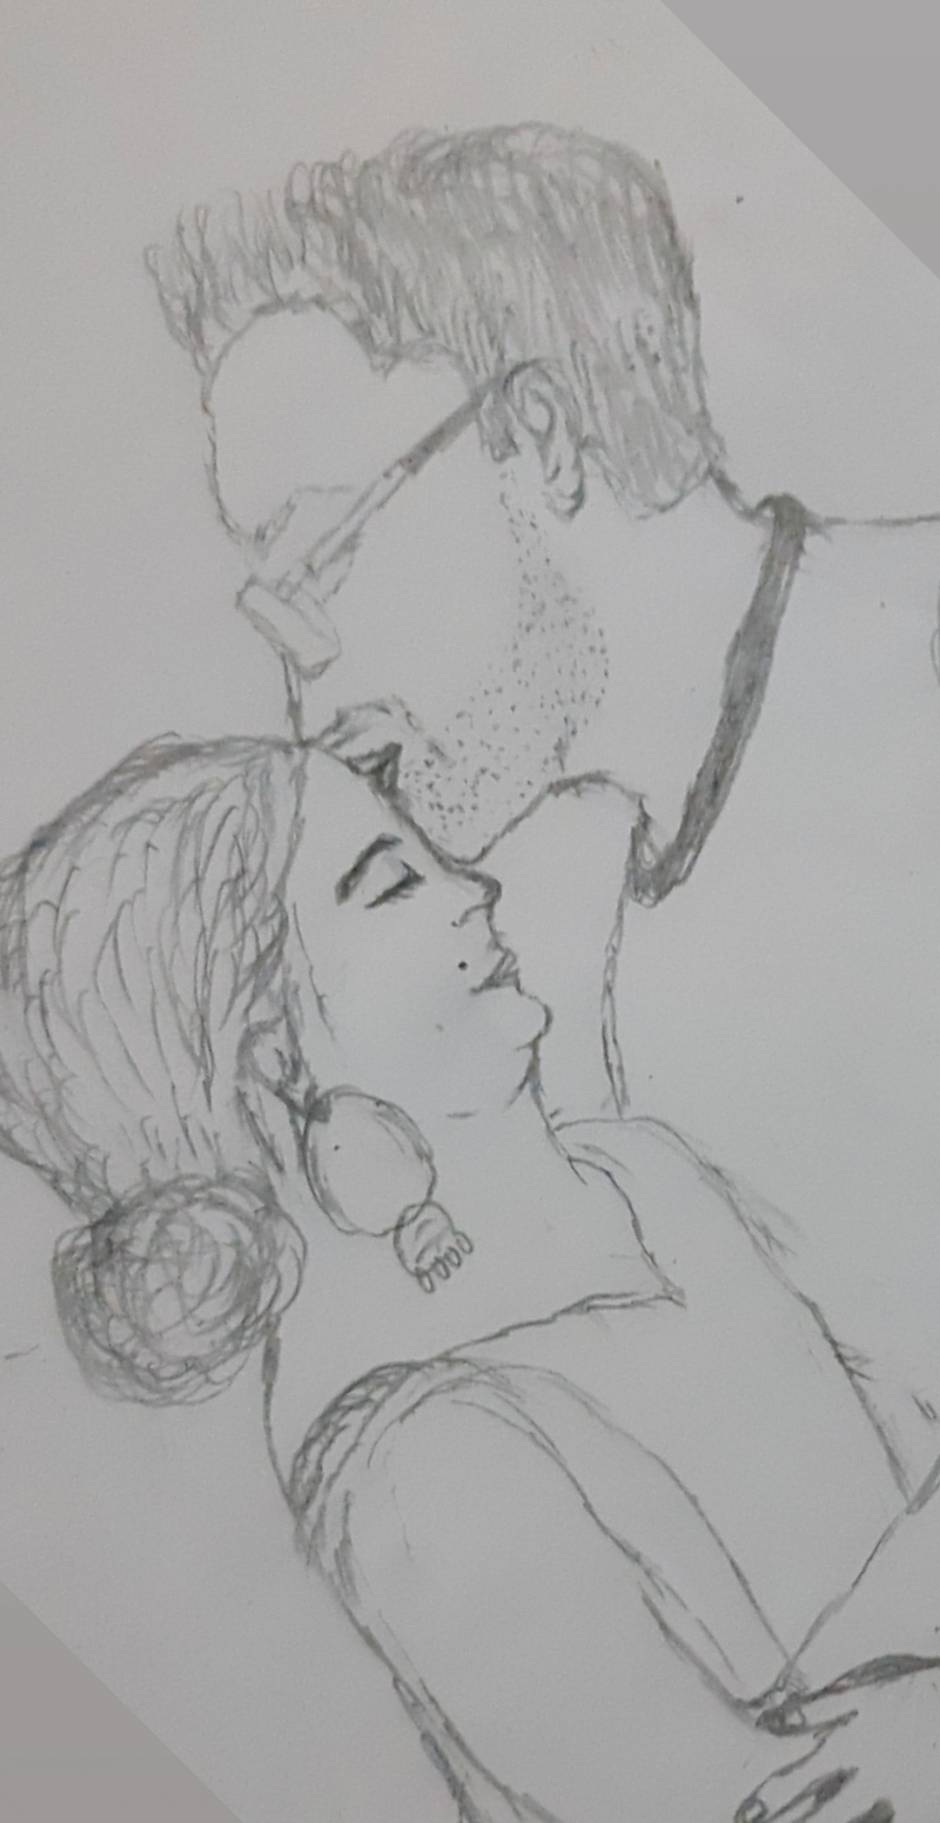 Modern Young Couple In Love Bearded Man Kissing Girl In Forehead Romantic  Sketch Illustration Stock Illustration  Download Image Now  iStock